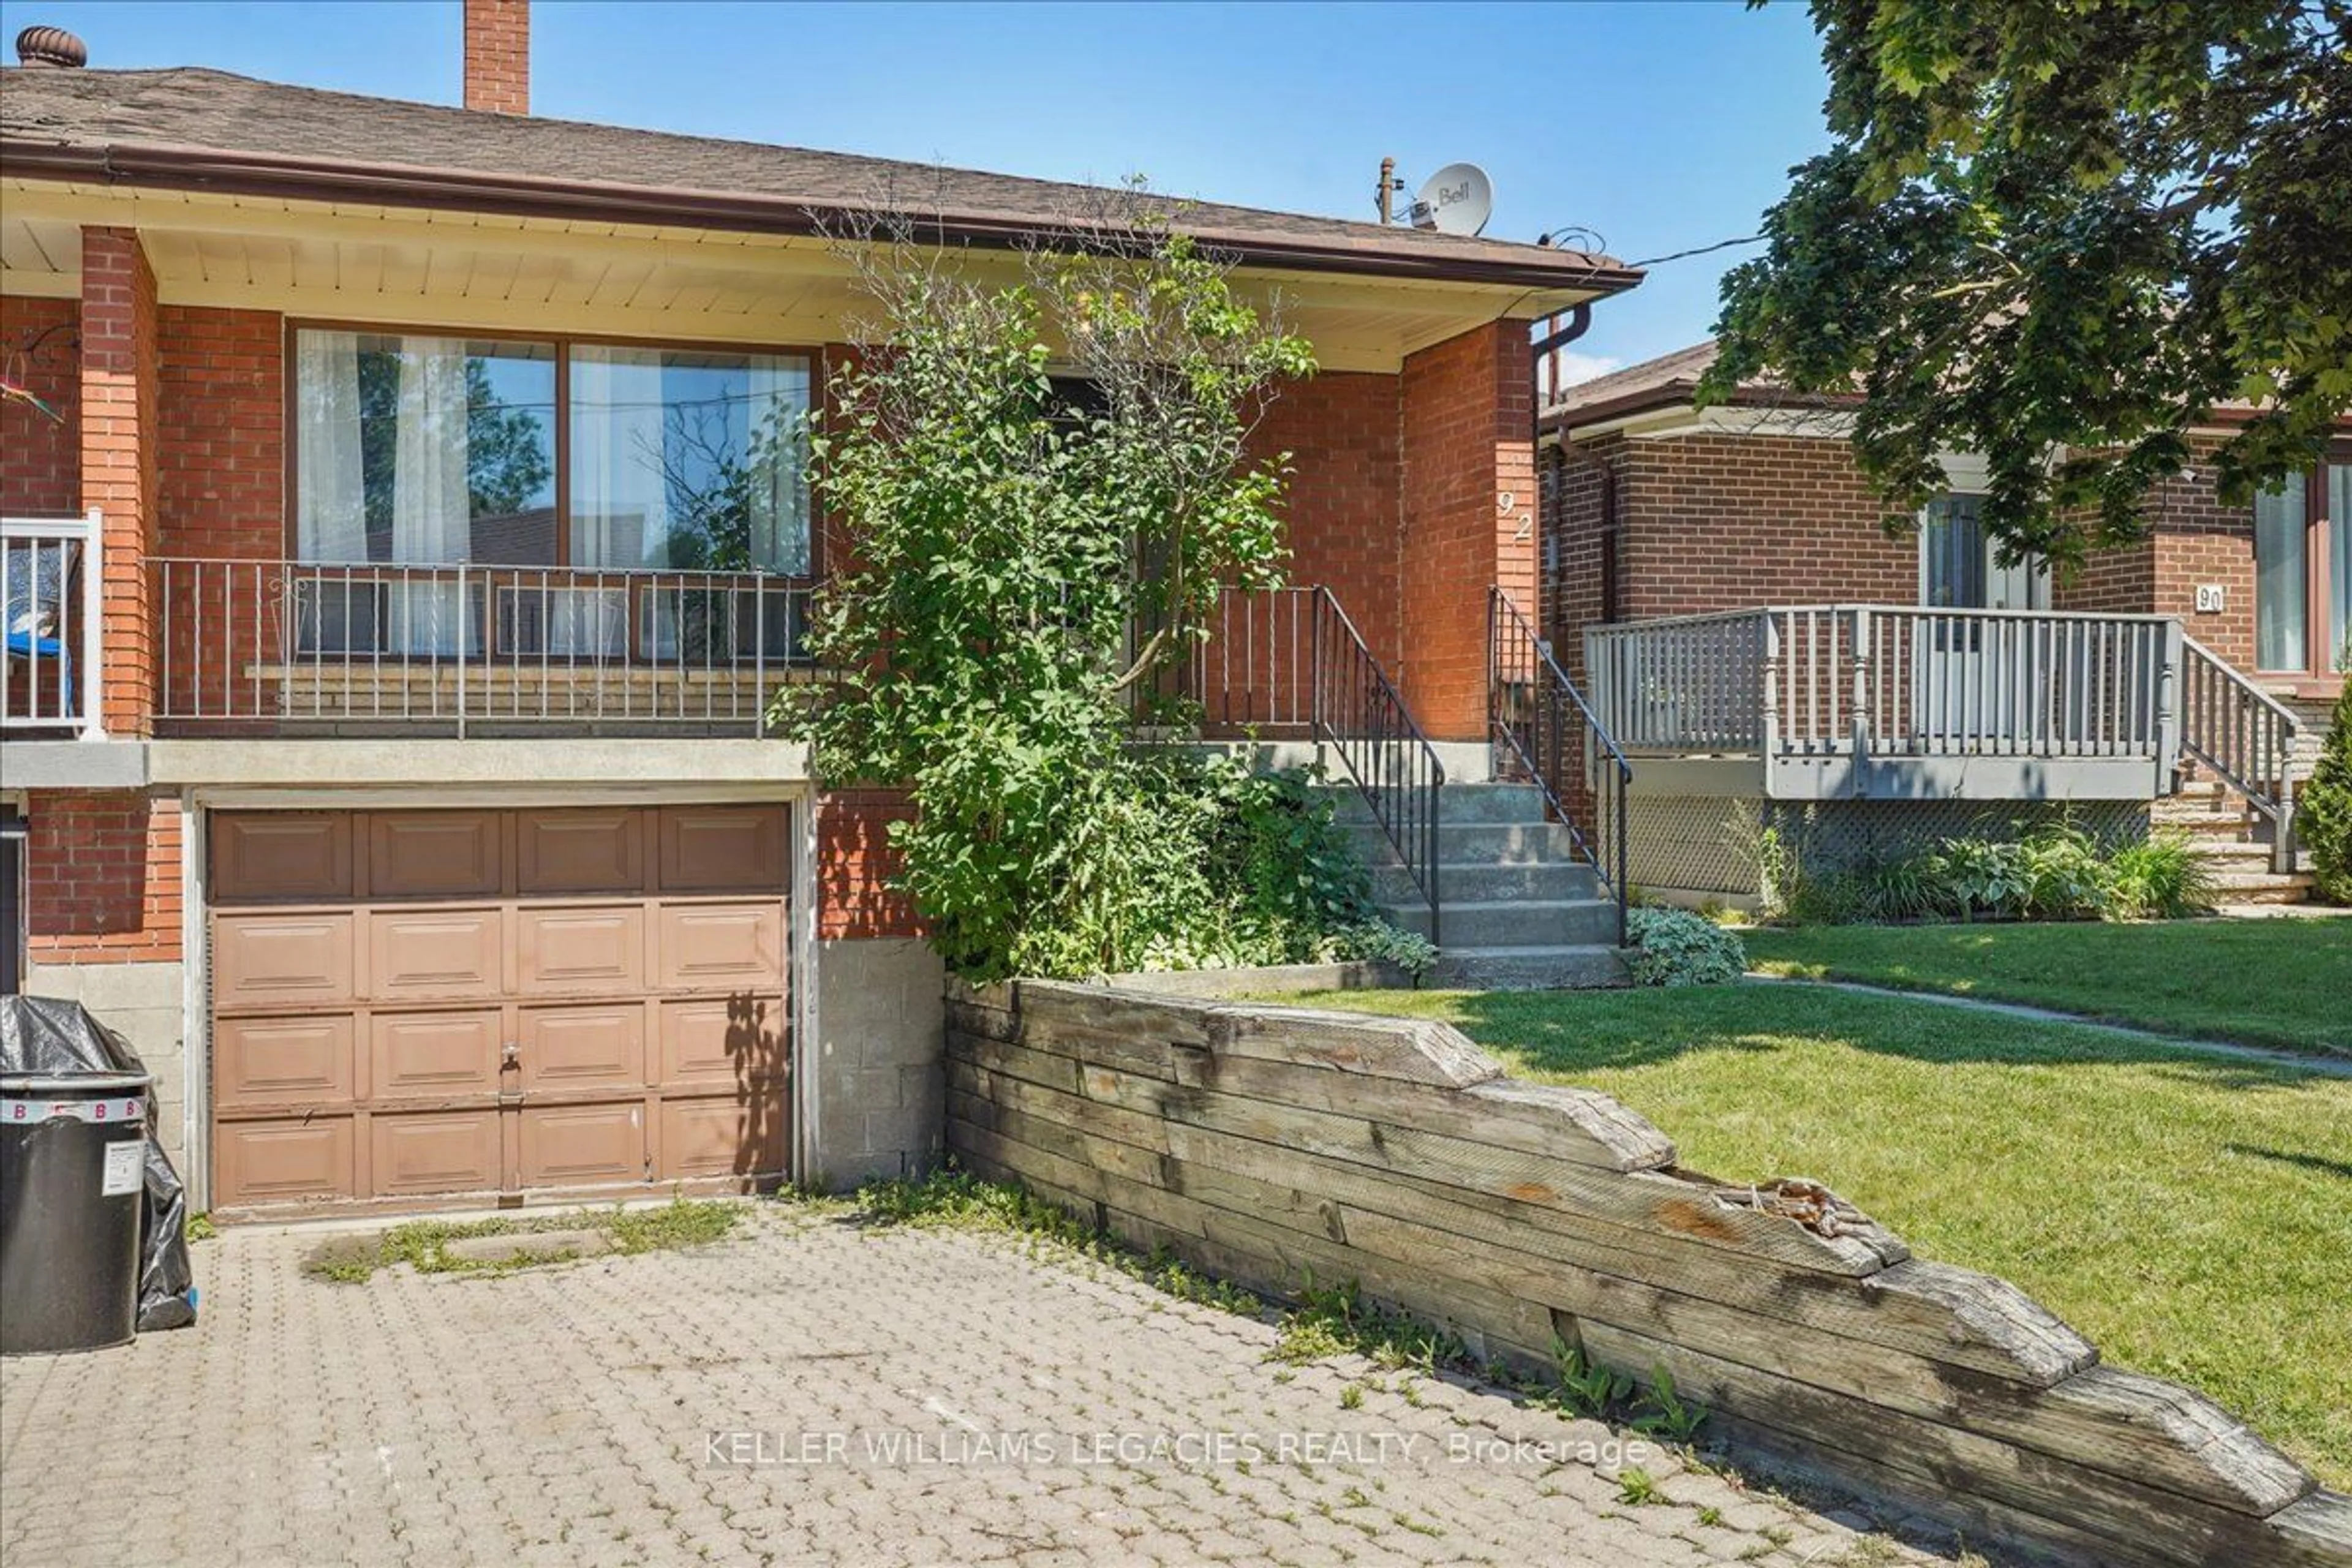 Home with brick exterior material for 92 Archibald St, Brampton Ontario L6X 1L9